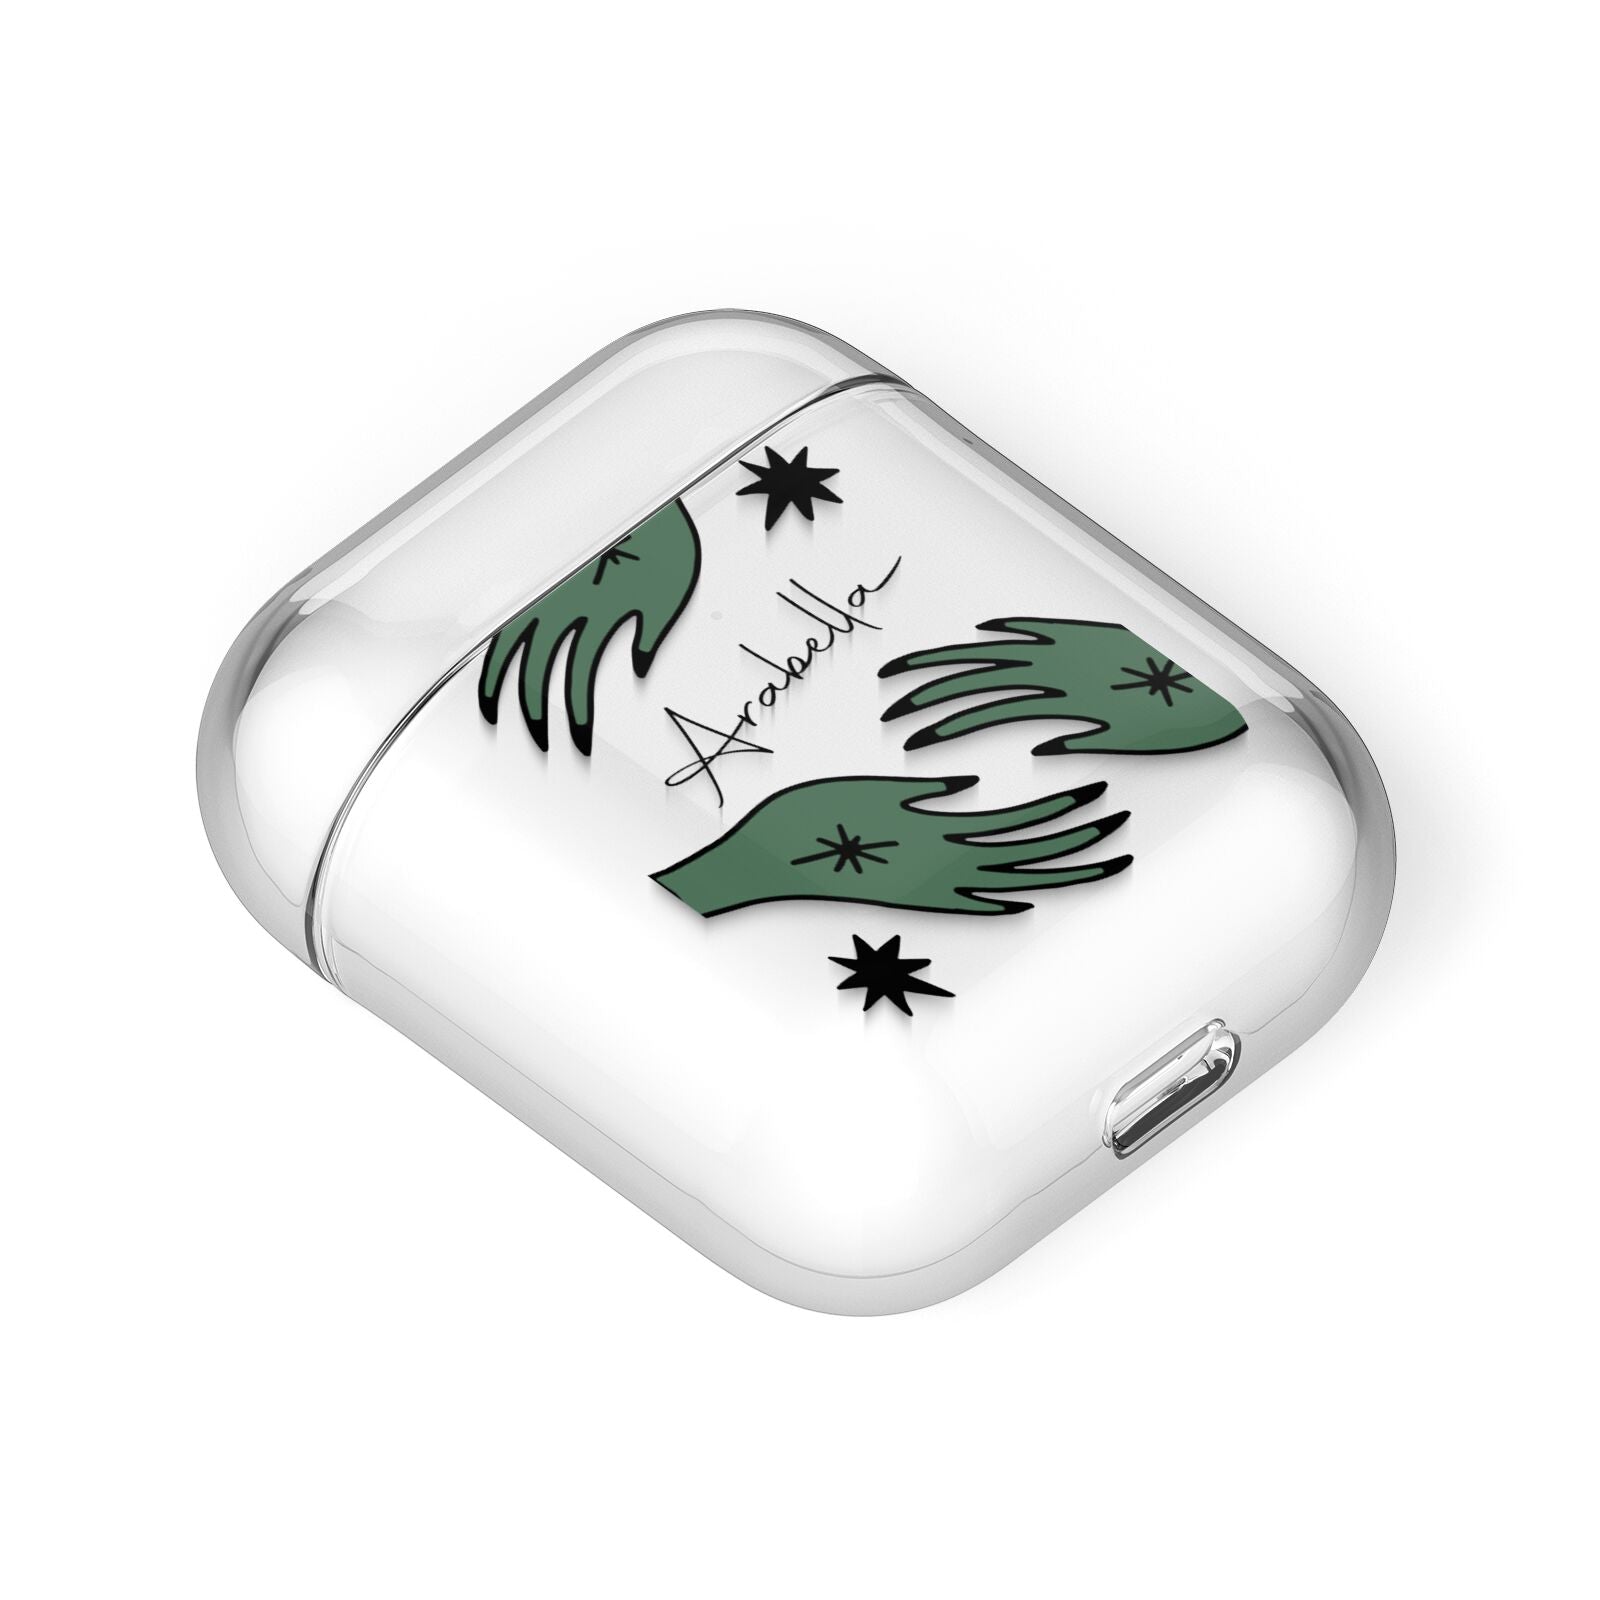 Green Star Hands Personalised AirPods Case Laid Flat